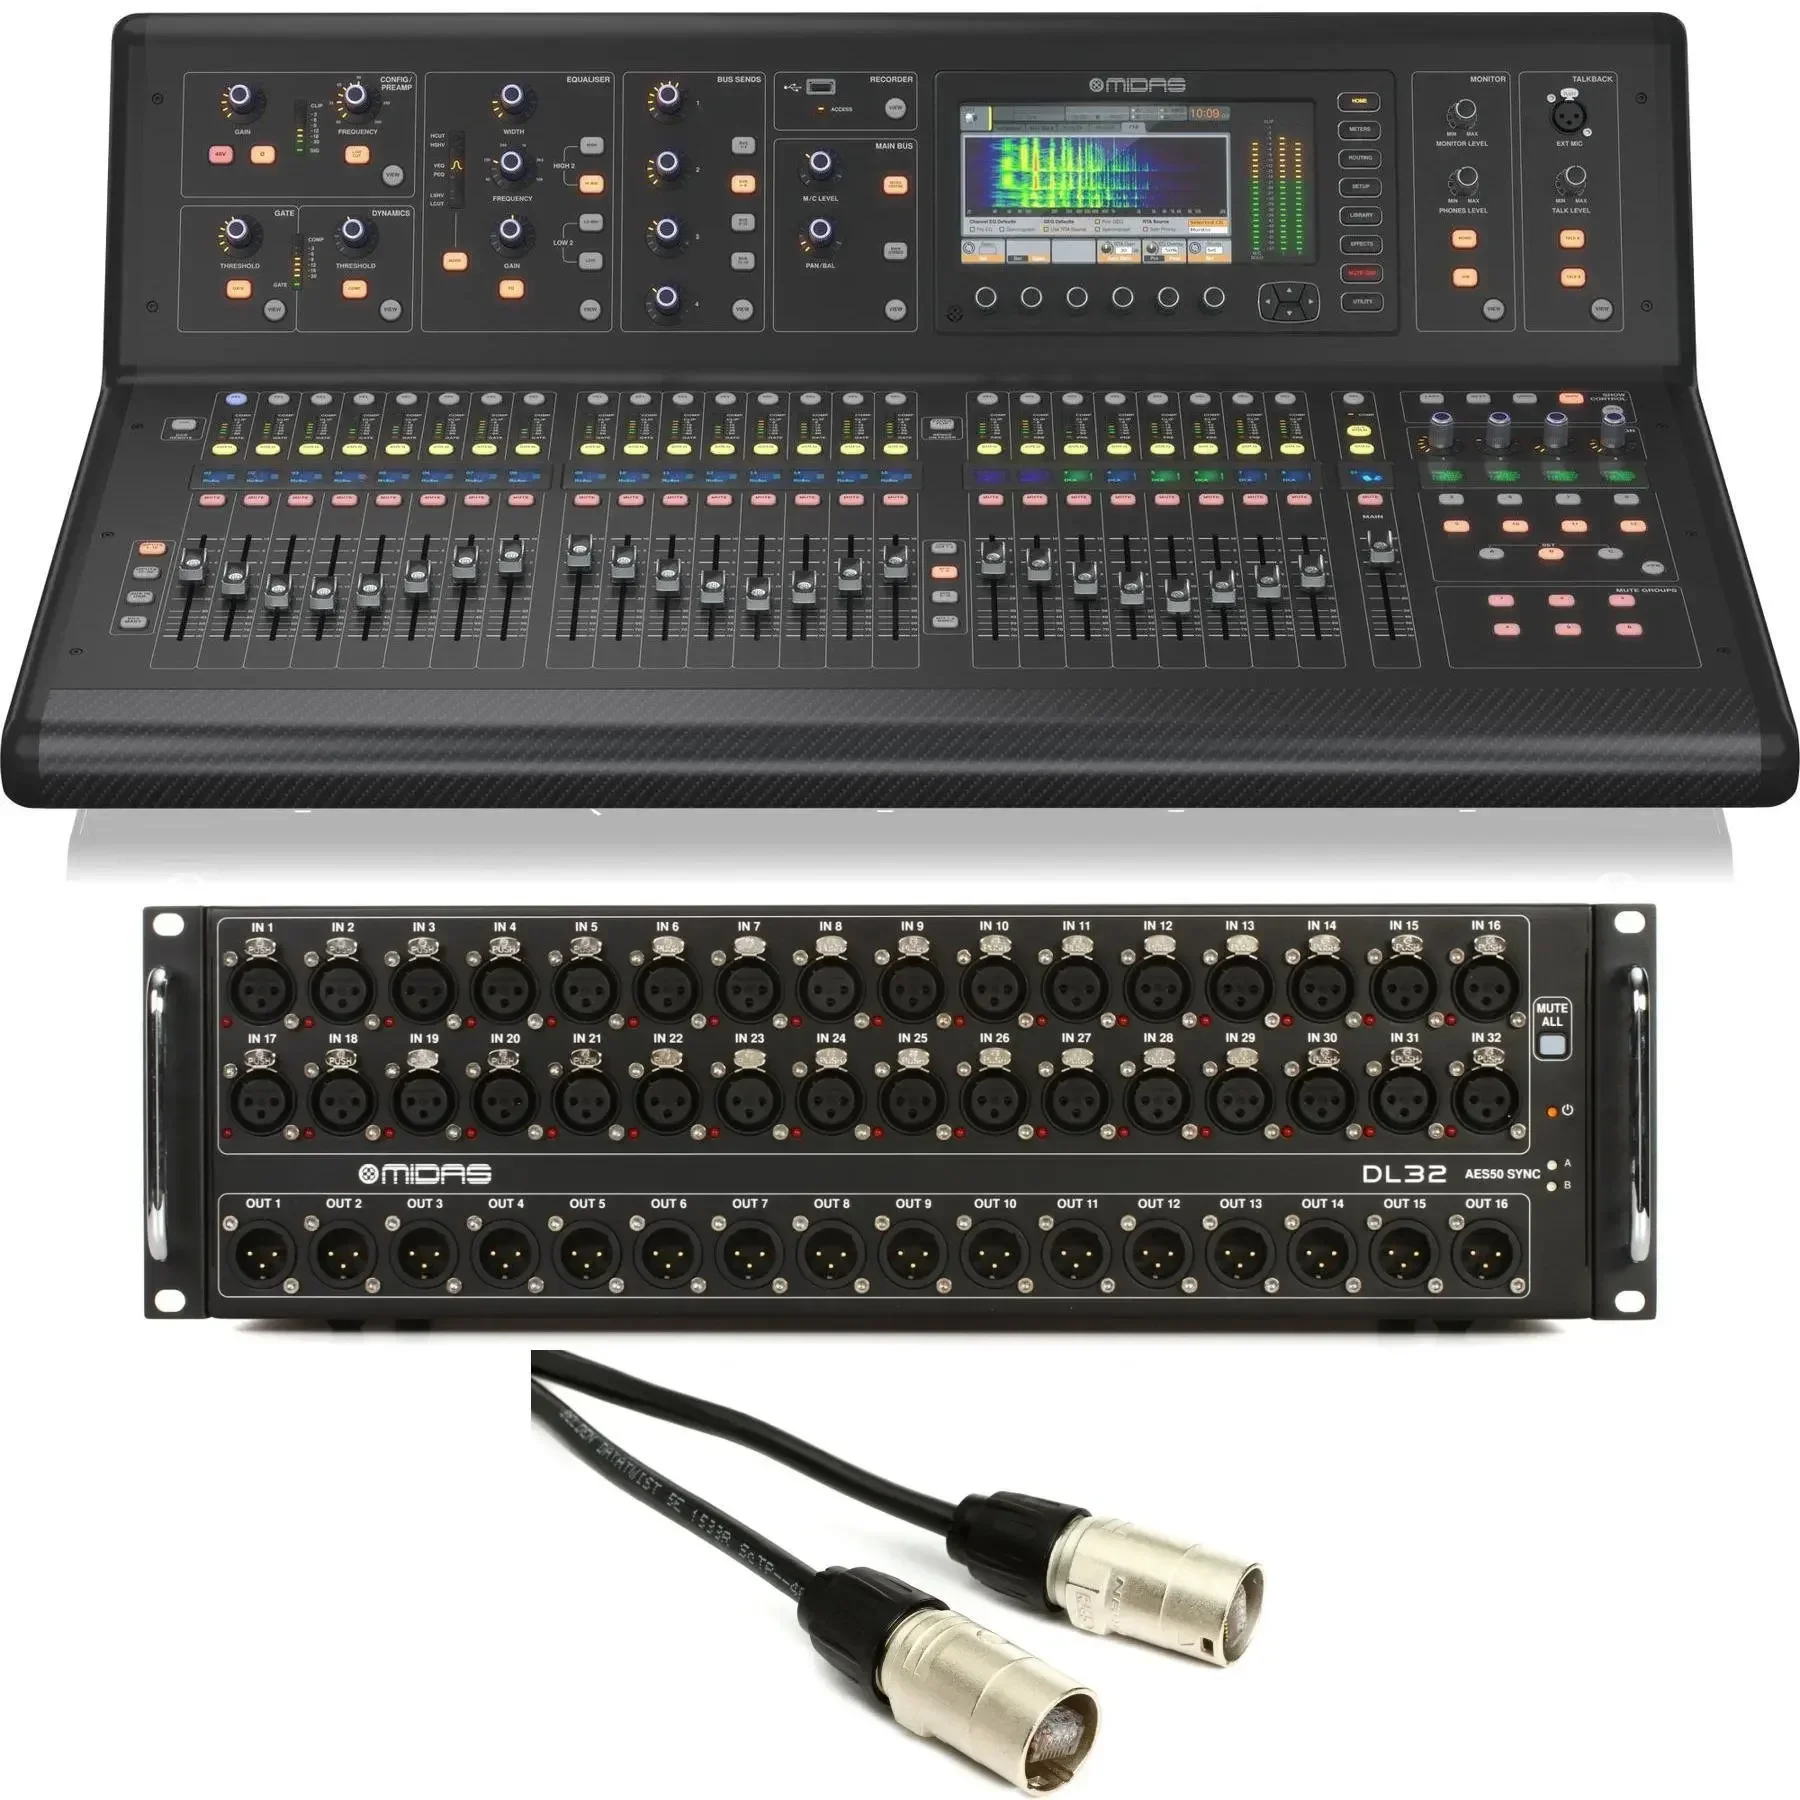 

SUMMER SALES DISCOUNT ON 100% DISCOUNTED 2022 Midas M32 Live Digital Mixer + DL32 Stage Box + 150' Cat5 Network Cable Spoolin st